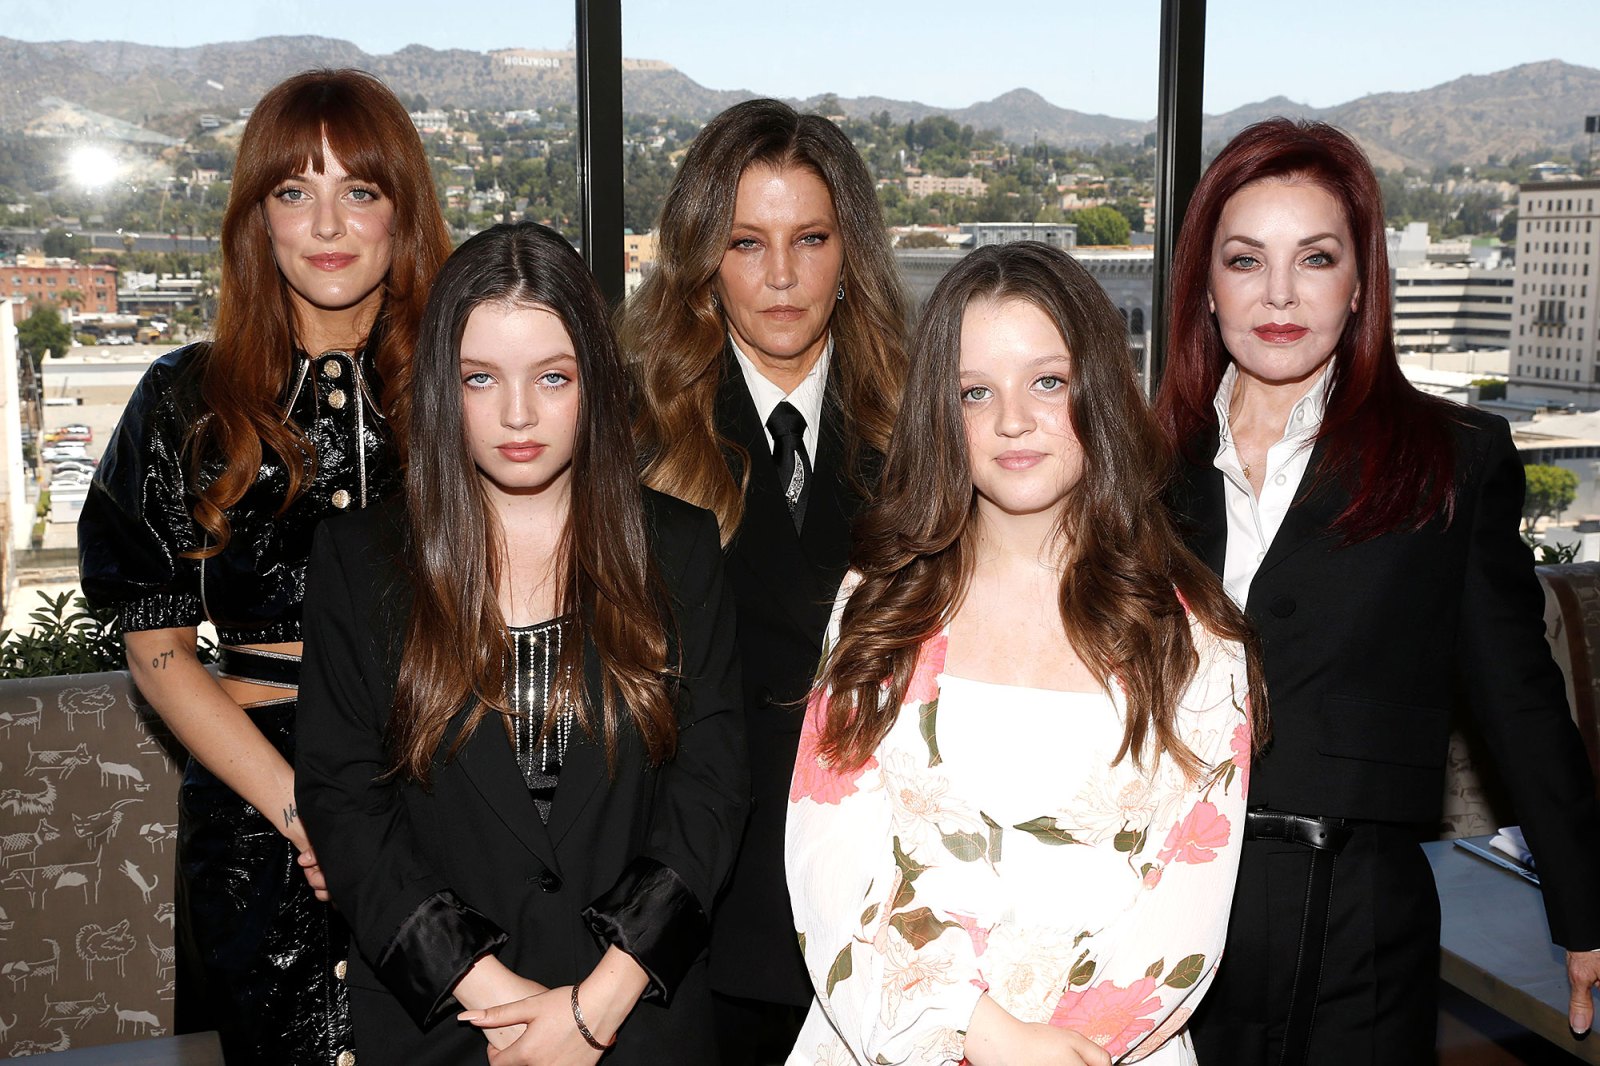 Nside Priscilla Presley And Riley Keough Relationships With Lisa Marie Presley Twin Daughters Harper And Finley Amid Family Estate Battle 2 ?w=1600&quality=86&strip=all